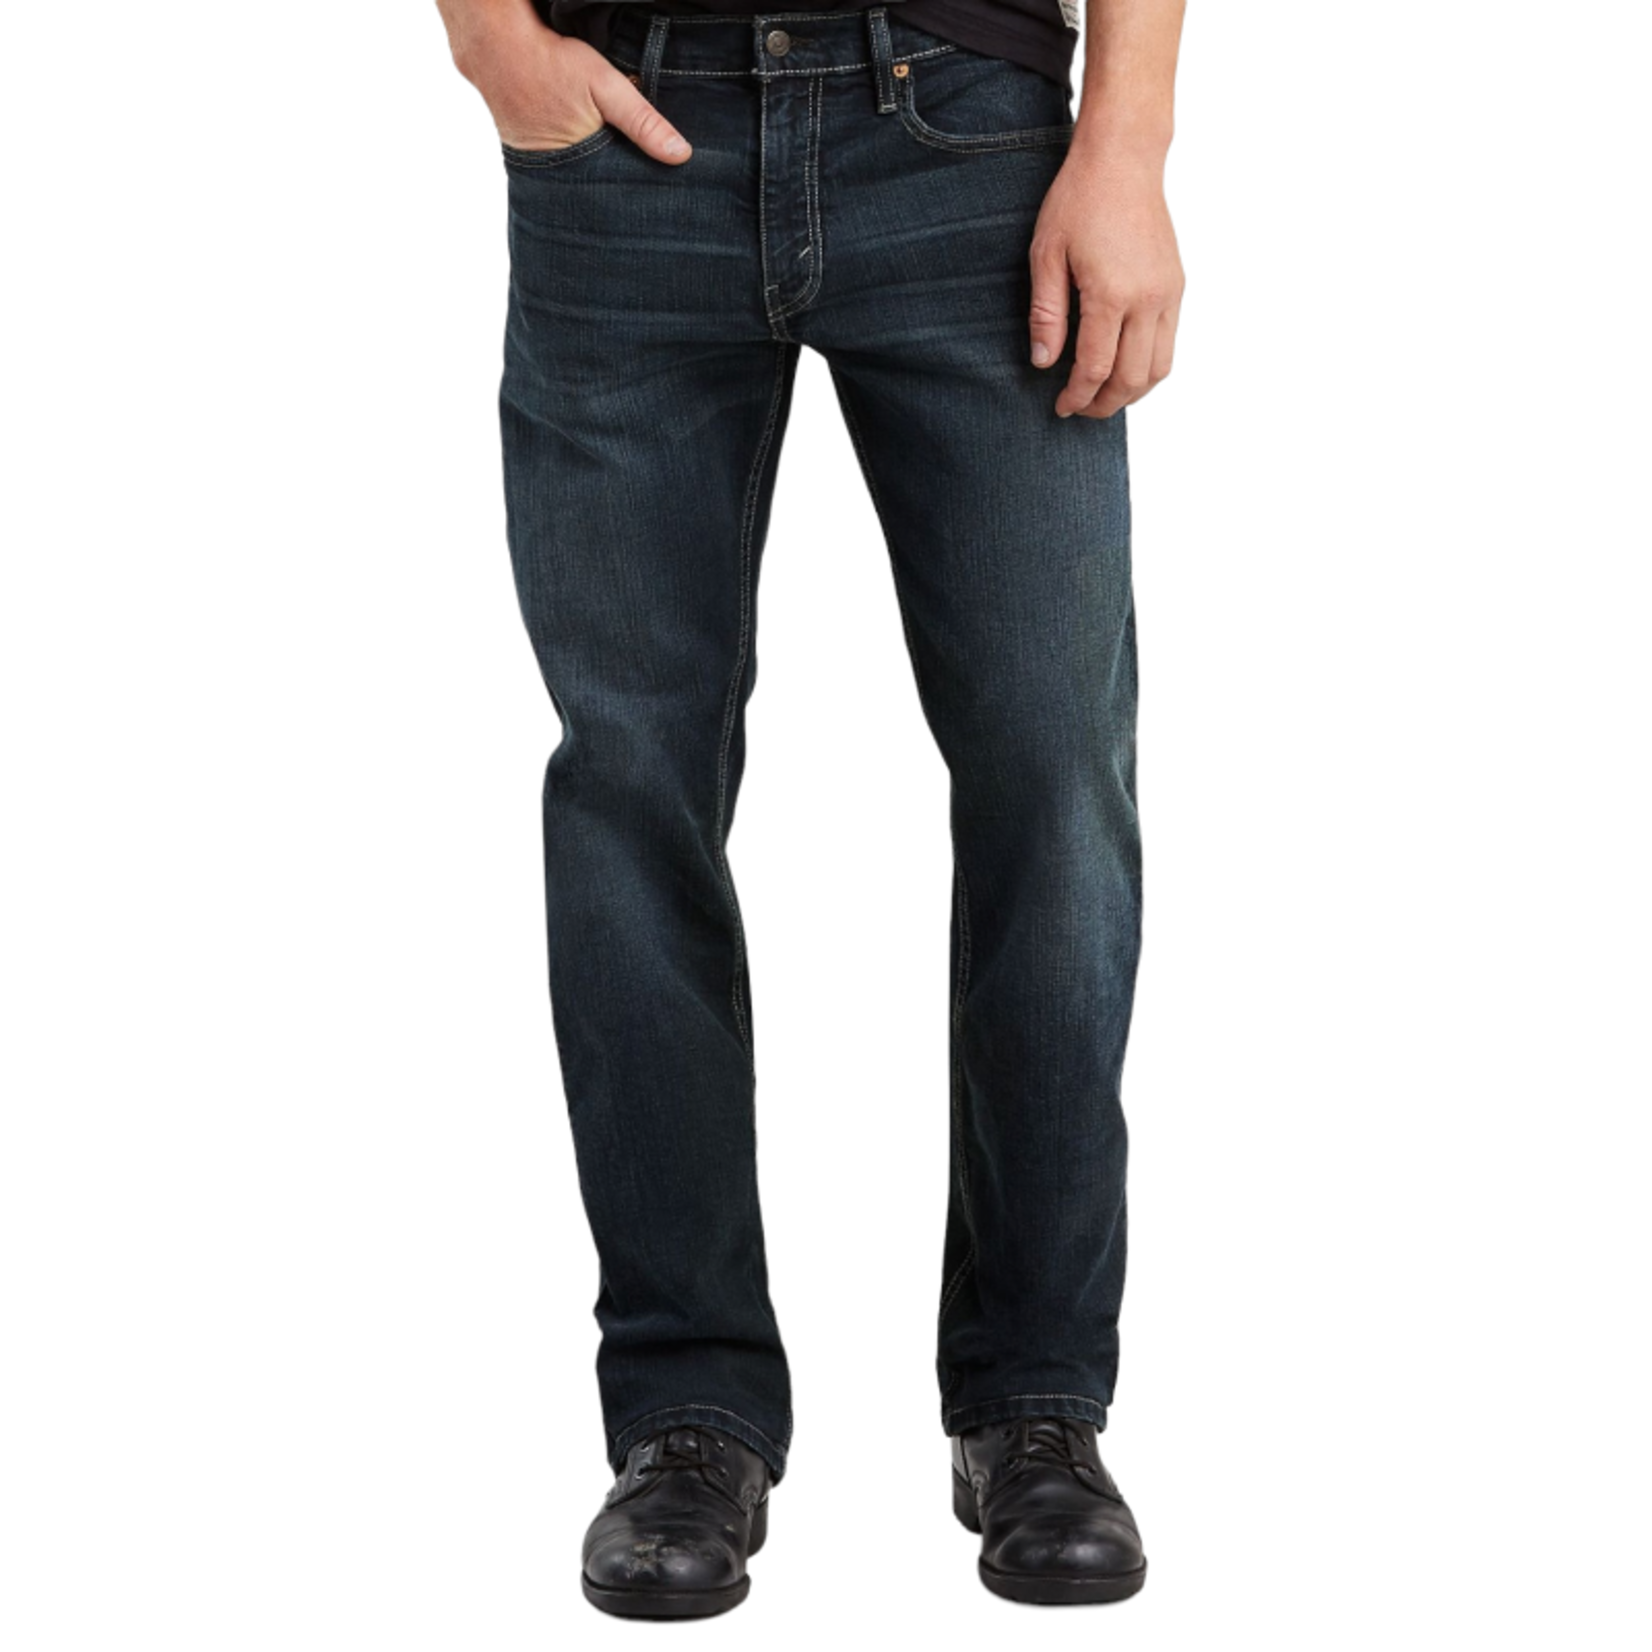 LEVI'S 559 RELAXED STRAIGHT FIT JEAN 00559-0457 - Michael's and Jody's